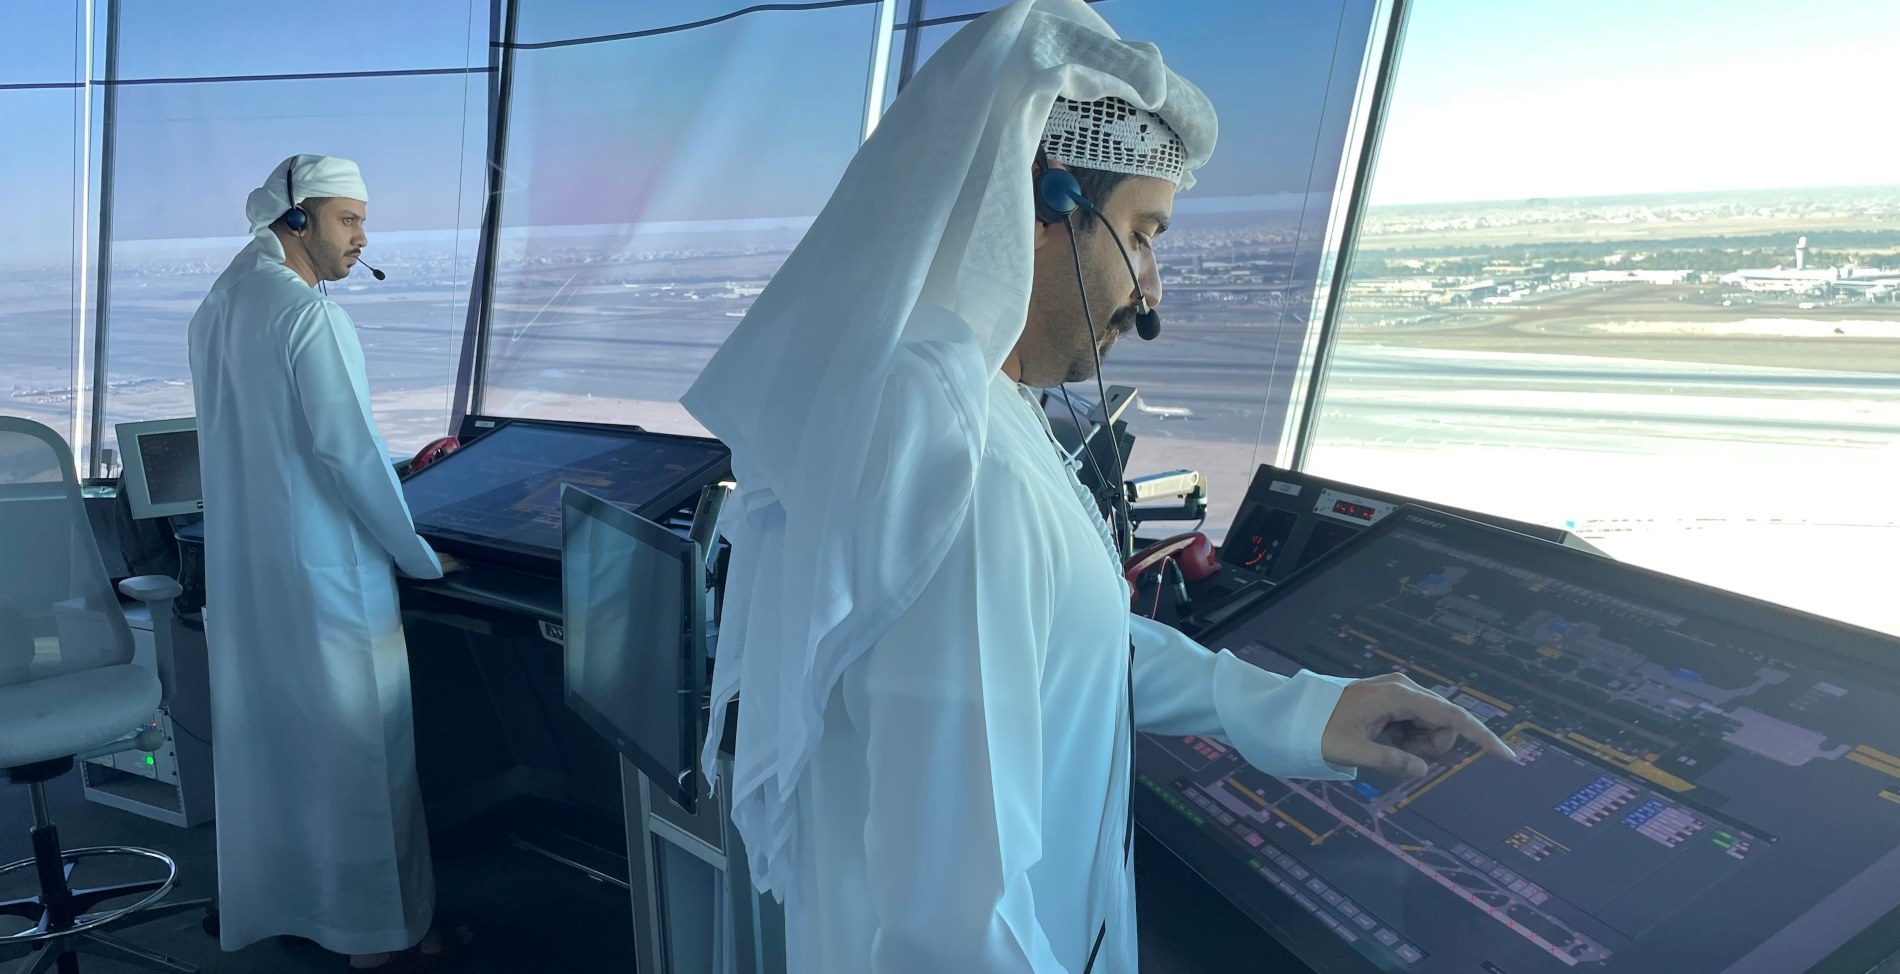 A-SMGCS Level 4 operations at Abu Dhabi International Airport